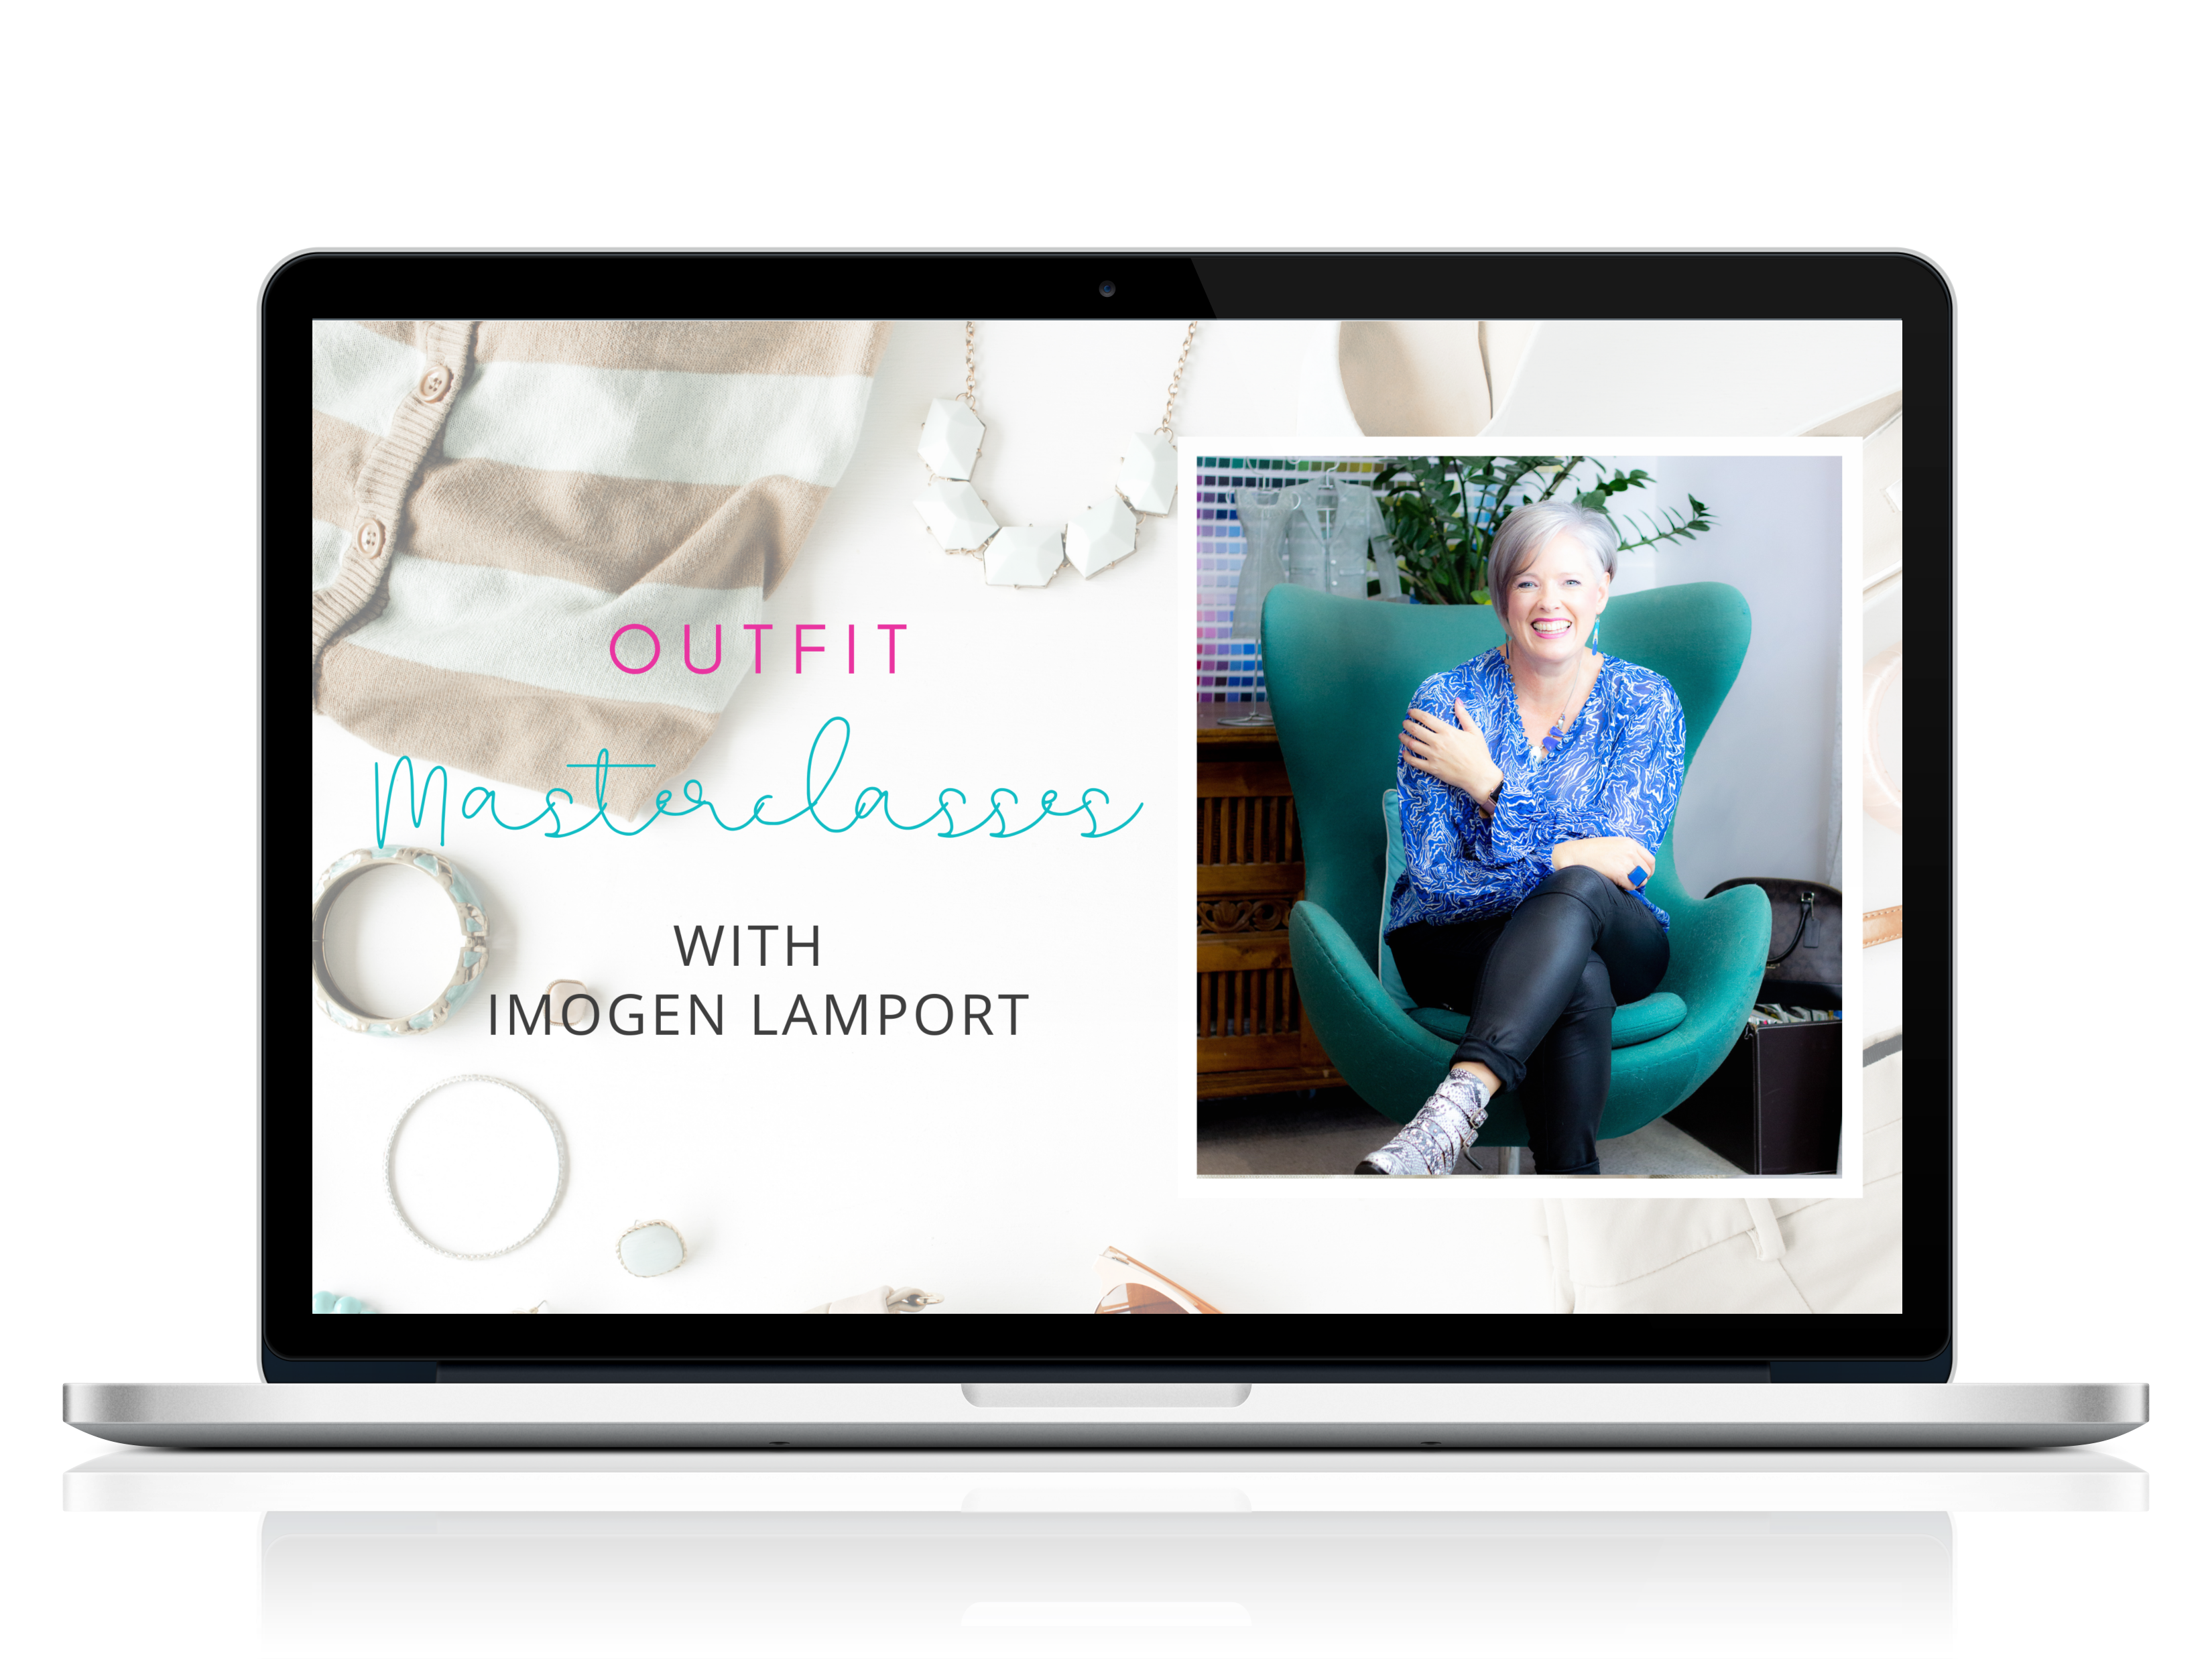 Outfit Masterclass with Imogen Lamport